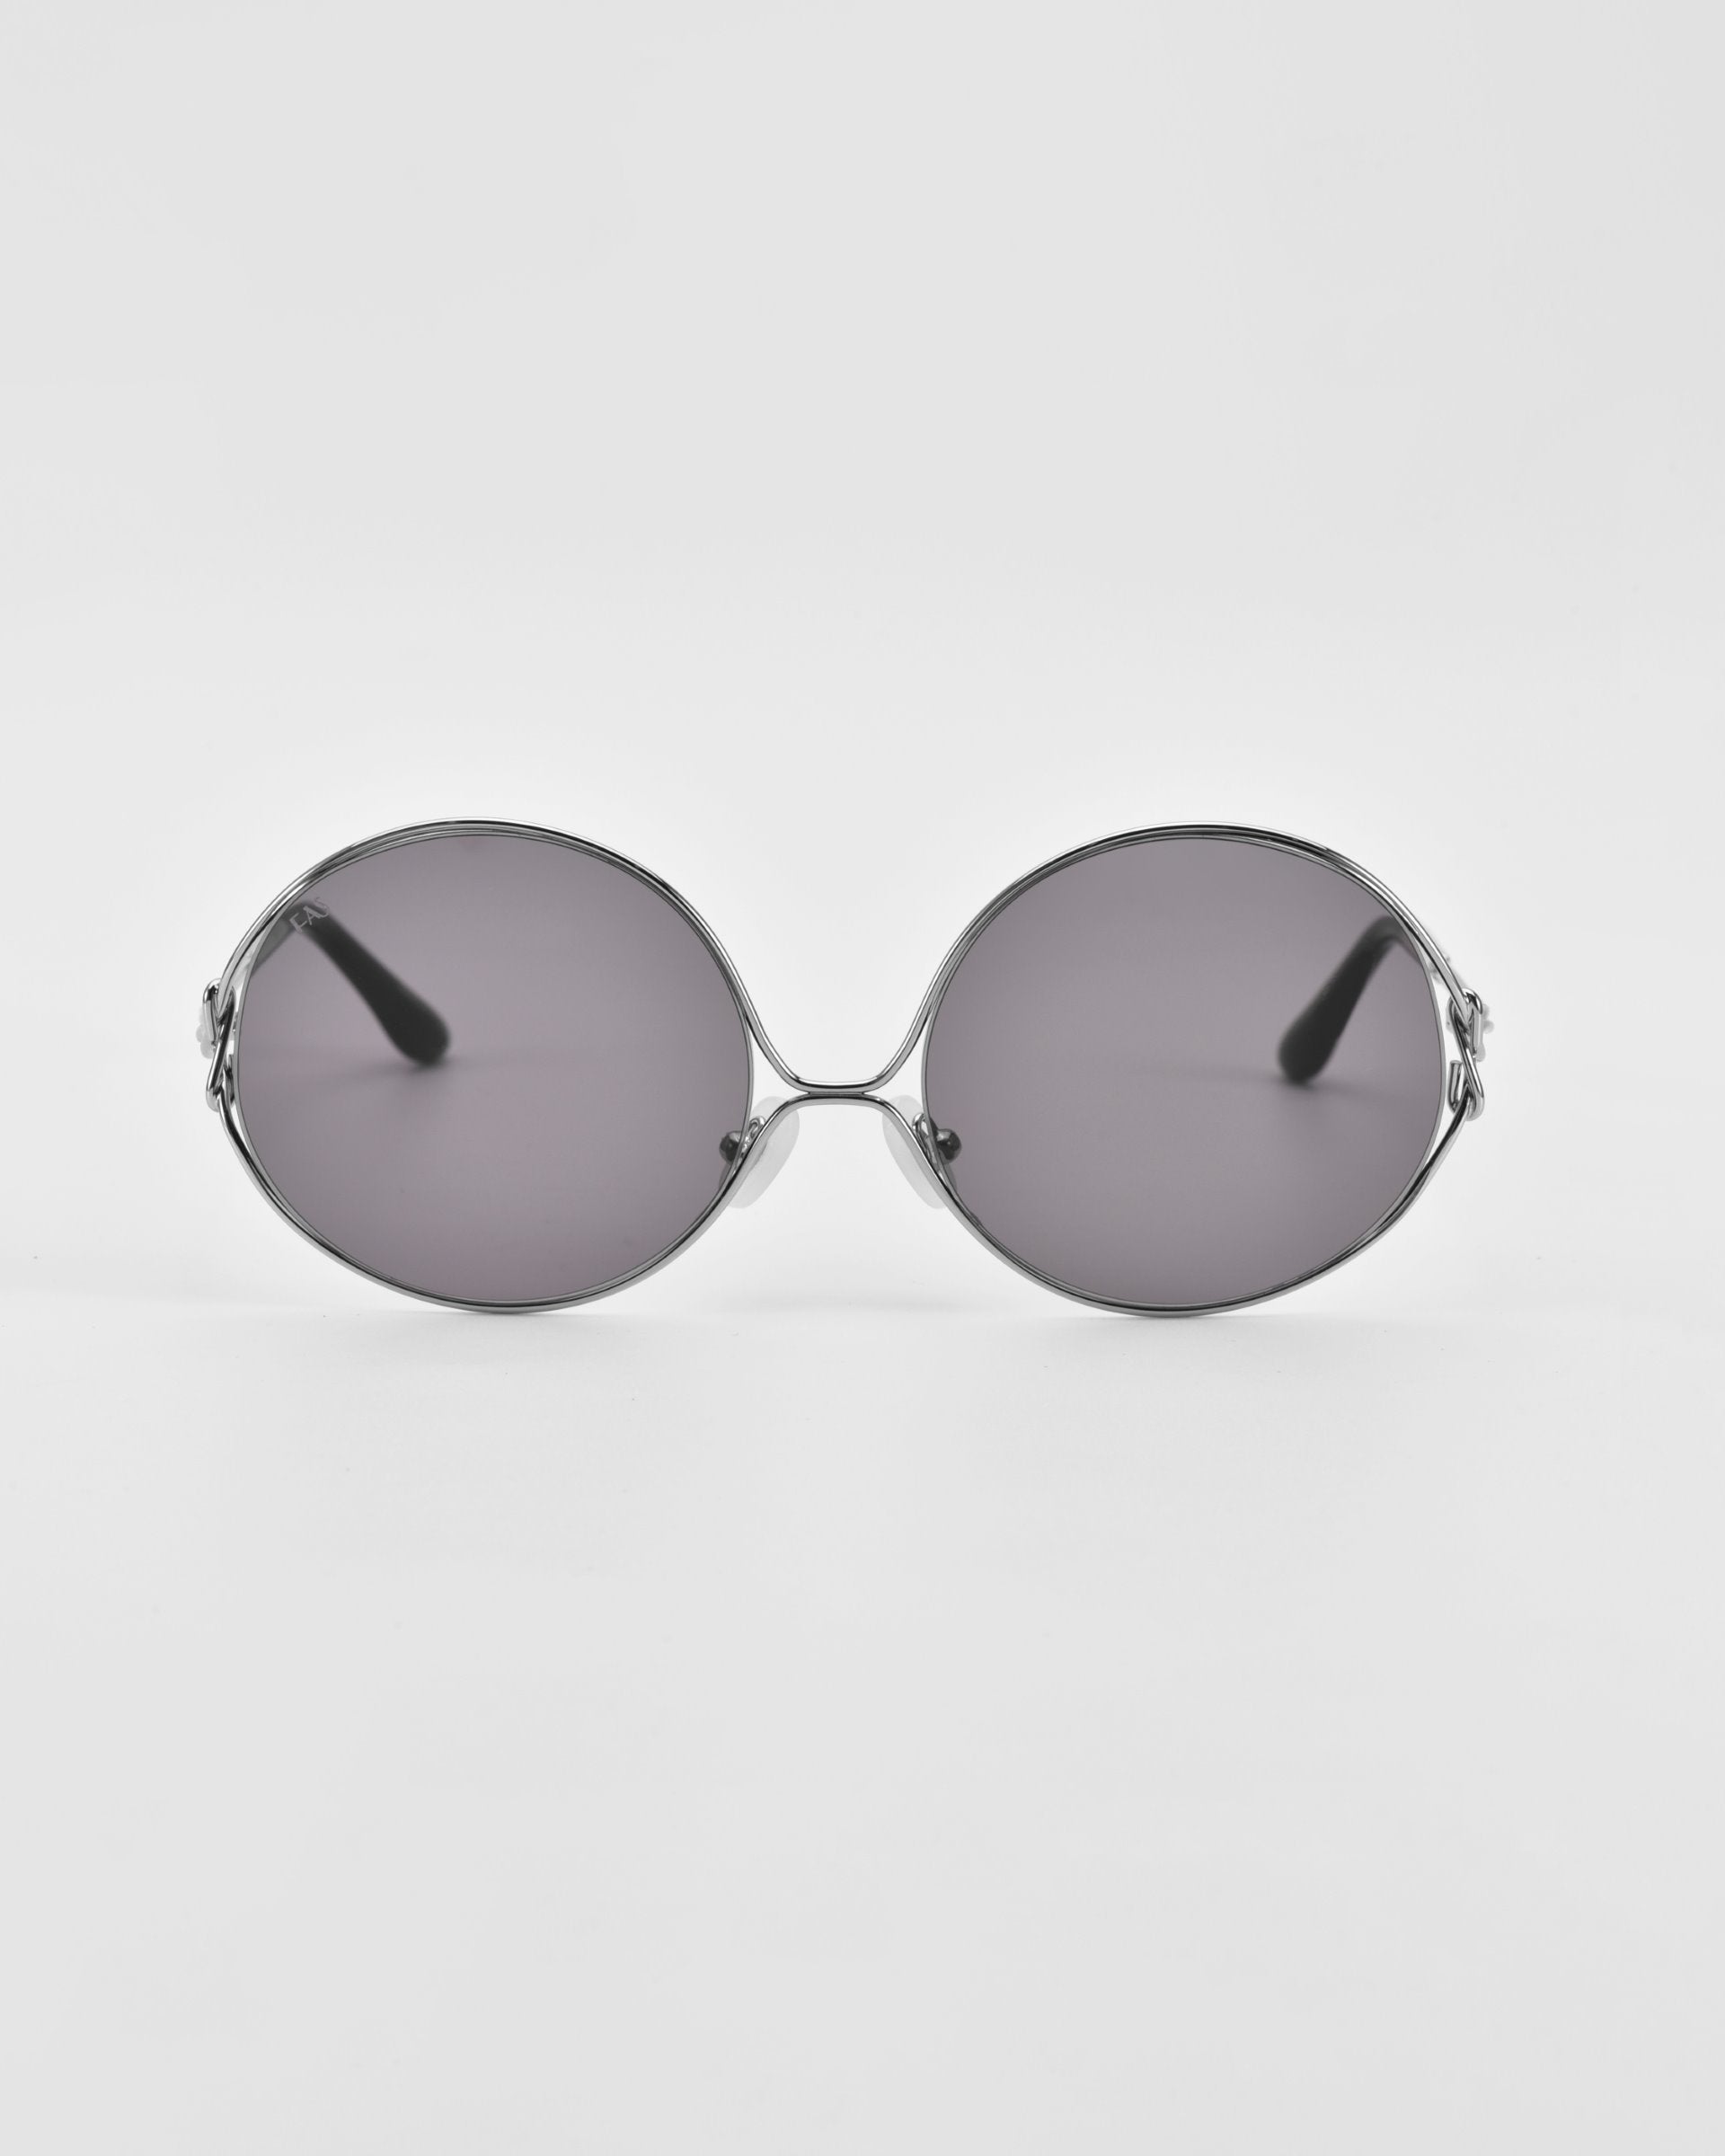 A pair of Aura sunglasses by For Art's Sake® with gradient tinted lenses and thin, silver-colored metal frames. The oversized round frames extend backward, offering a sleek and minimalist design. The sunglasses are set against a plain white background.